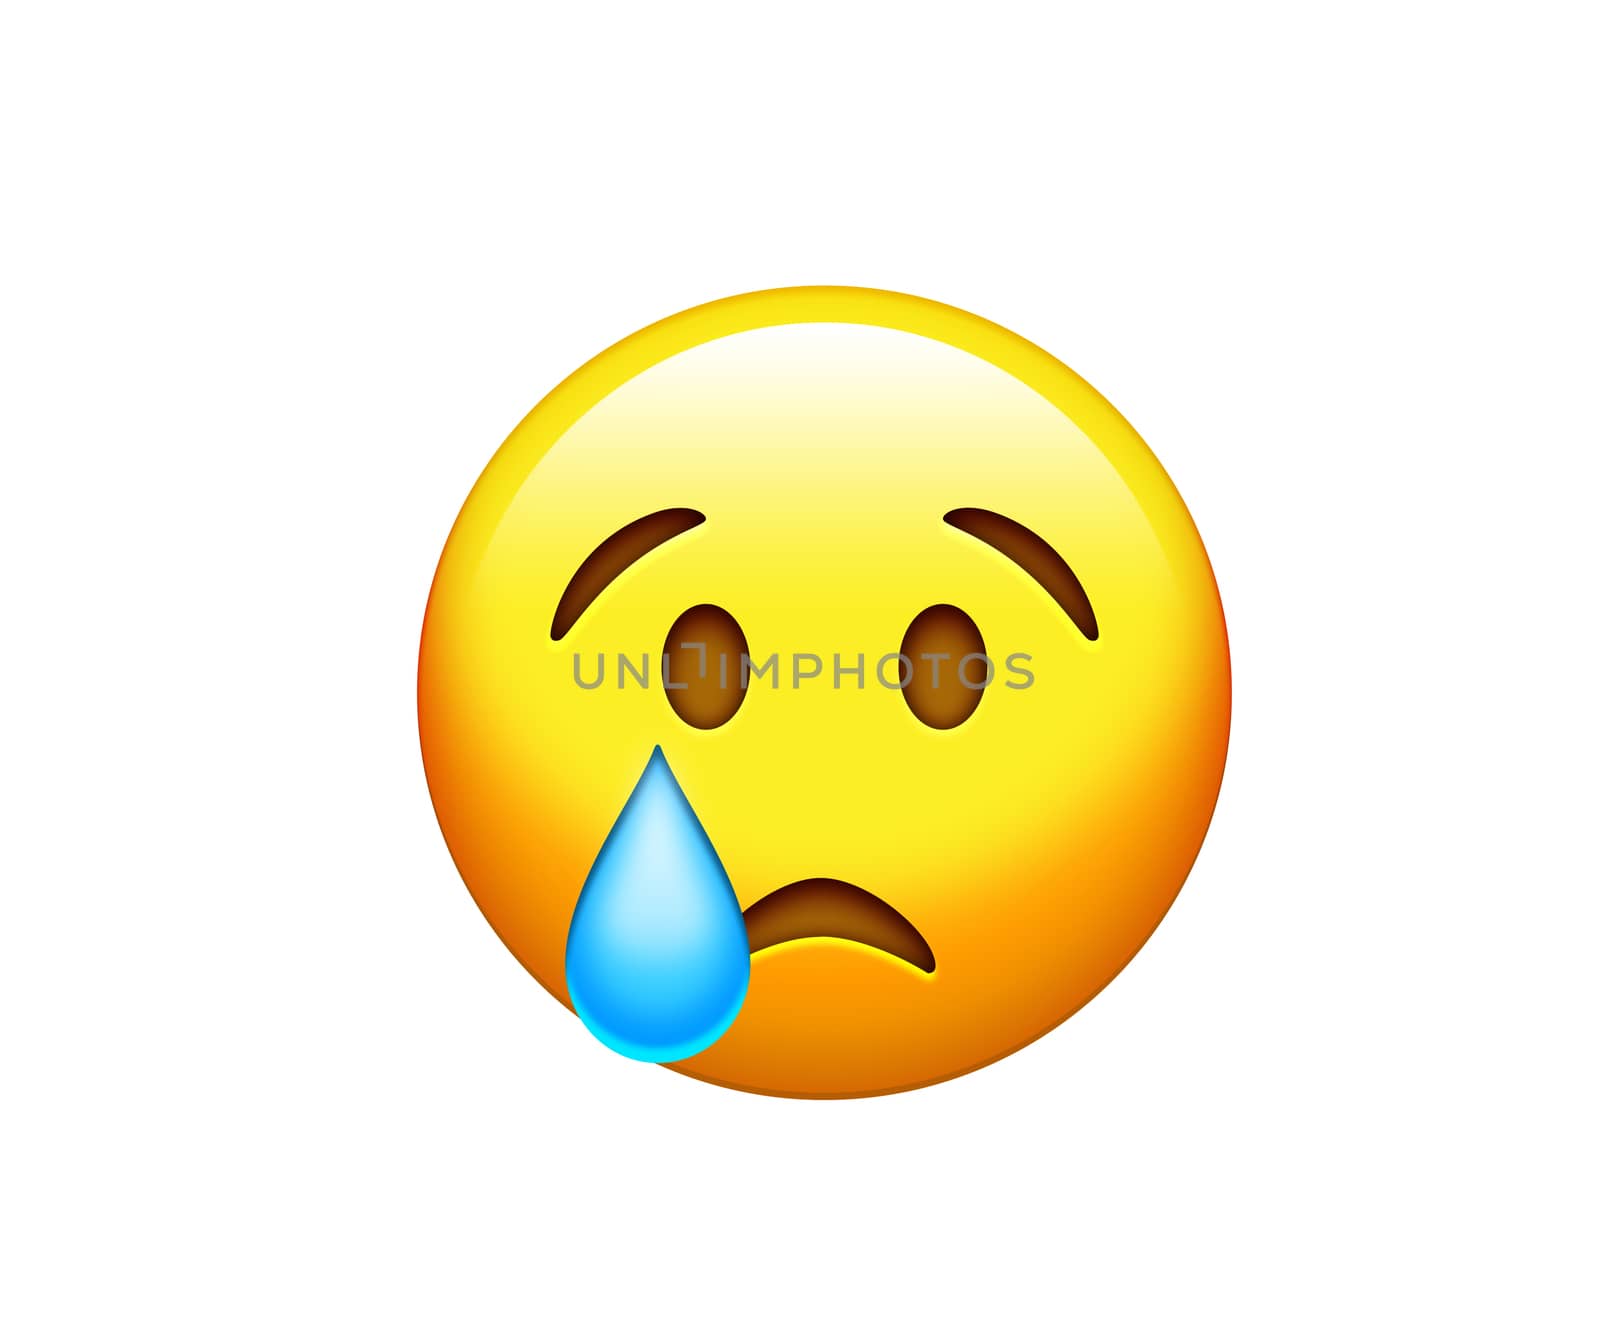 The emoji yellow sad face with a drop of blue crying tear icon